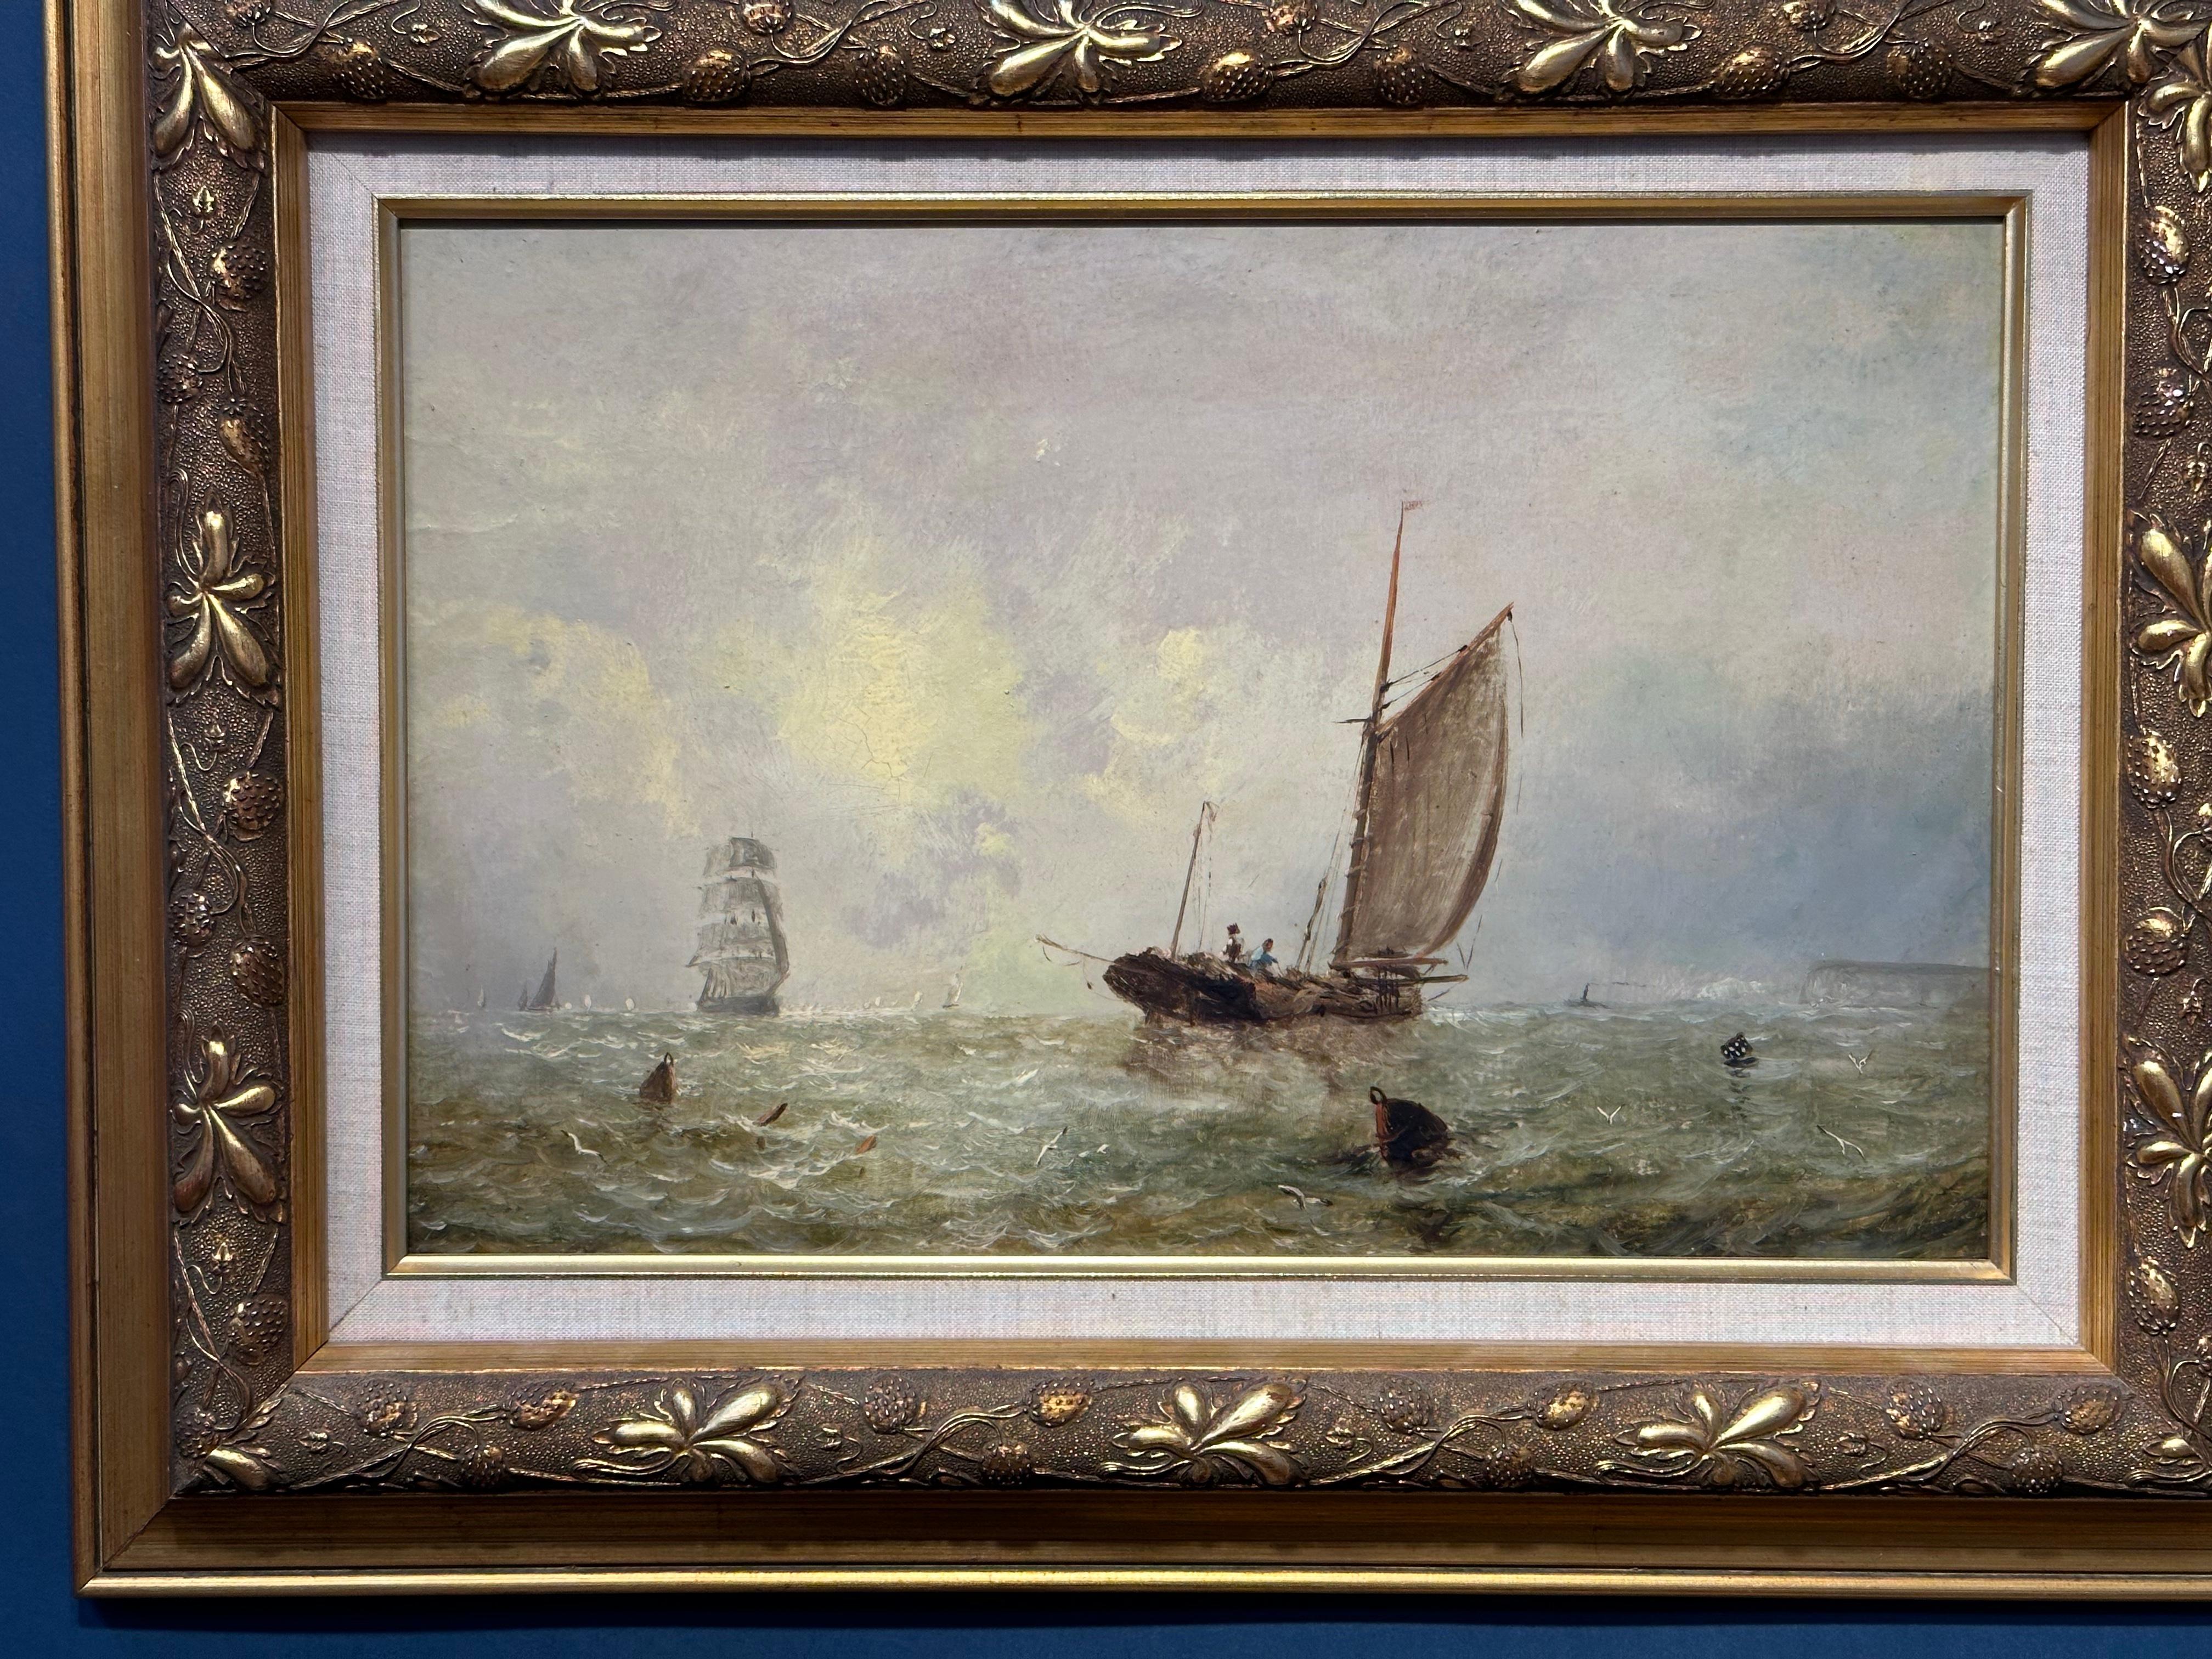 Antique Victorian, Impressionist 19th century English oil, Fishings boat at Sea.
Adolphus Knell was a superb painter of marine subjects during the middle of the 19th century. His work is collected all over the world and many are in important